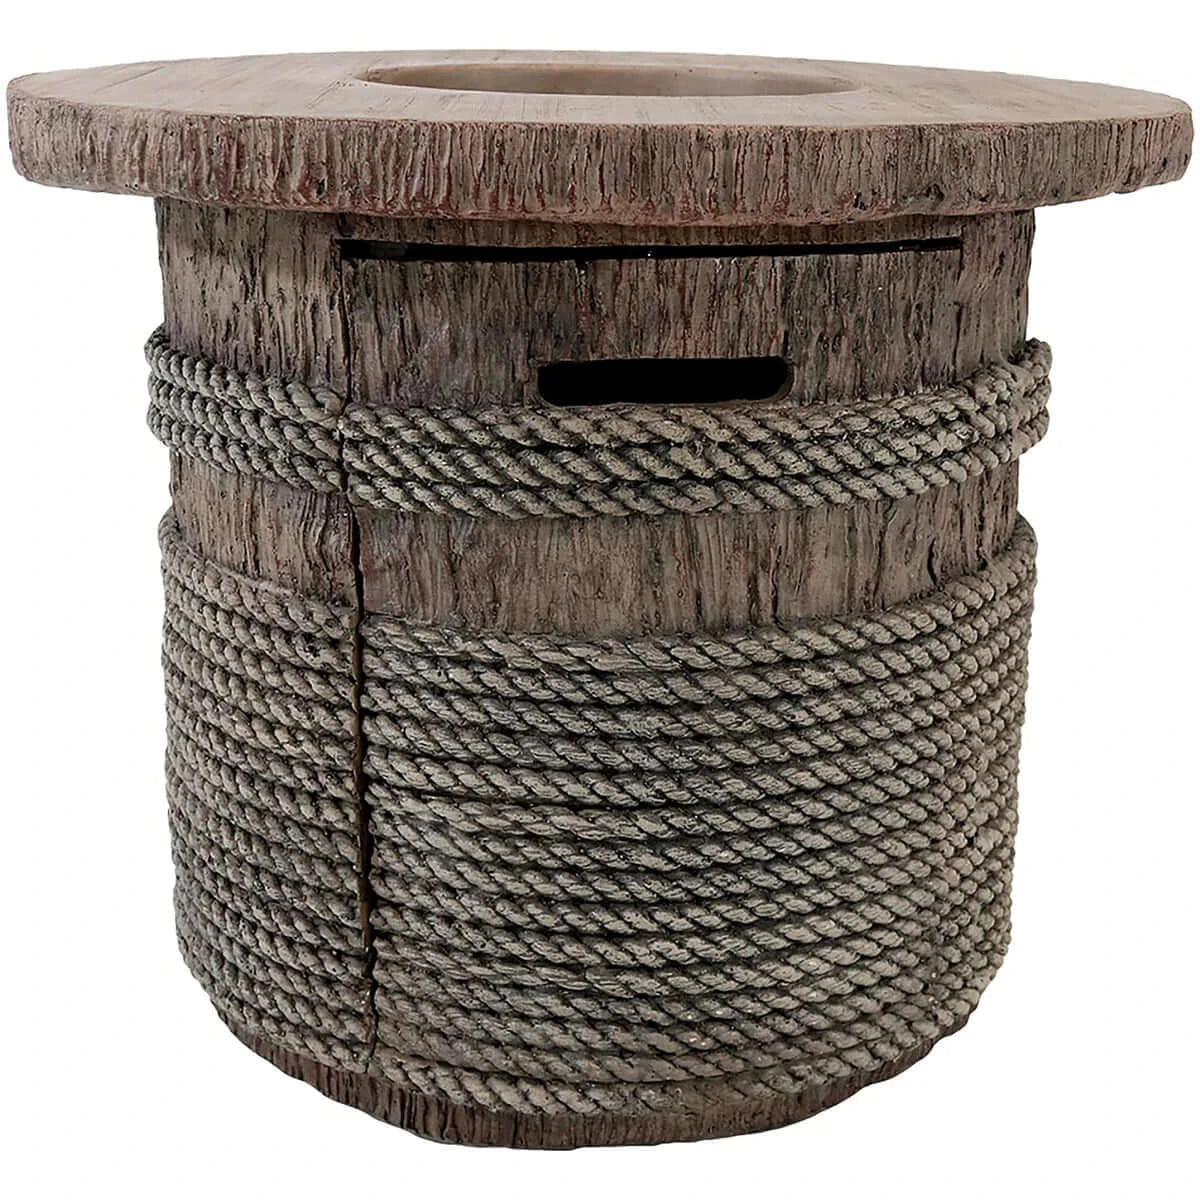 29" Rope and Barrel Fire Pit Table with Lava Rocks | Smokeless